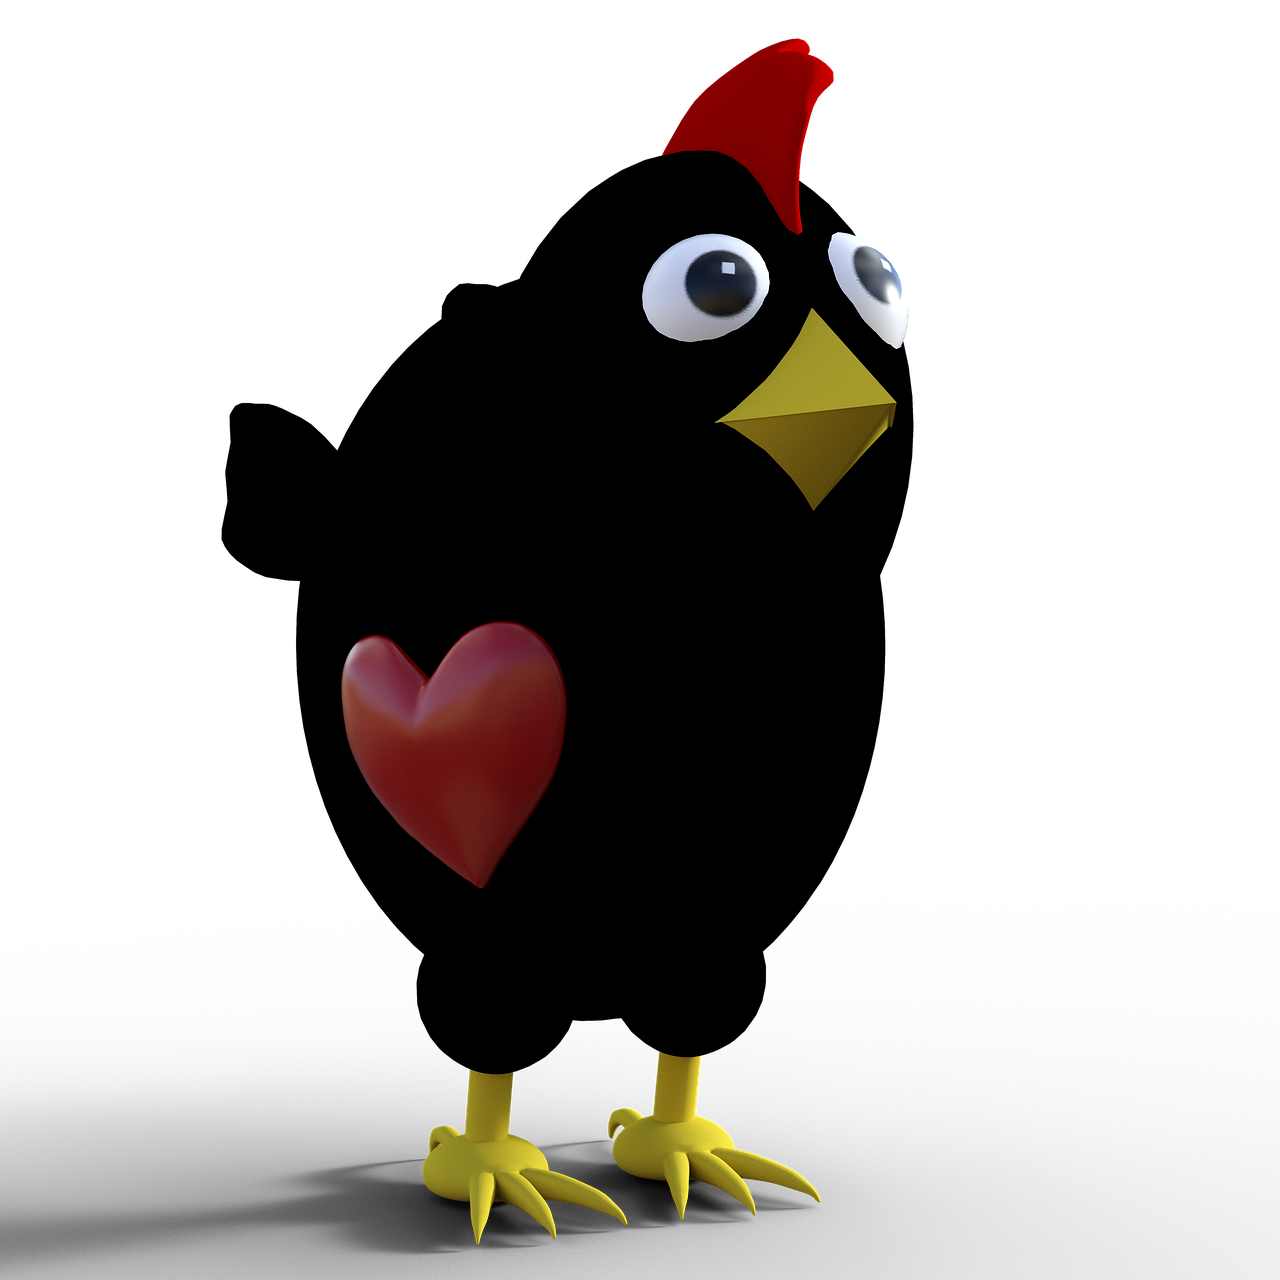 a close up of a bird with a heart, a raytraced image, inspired by Eppo Doeve, flickr, anthropomorphized chicken, black main color, 3d model of a japanese mascot, juan miro